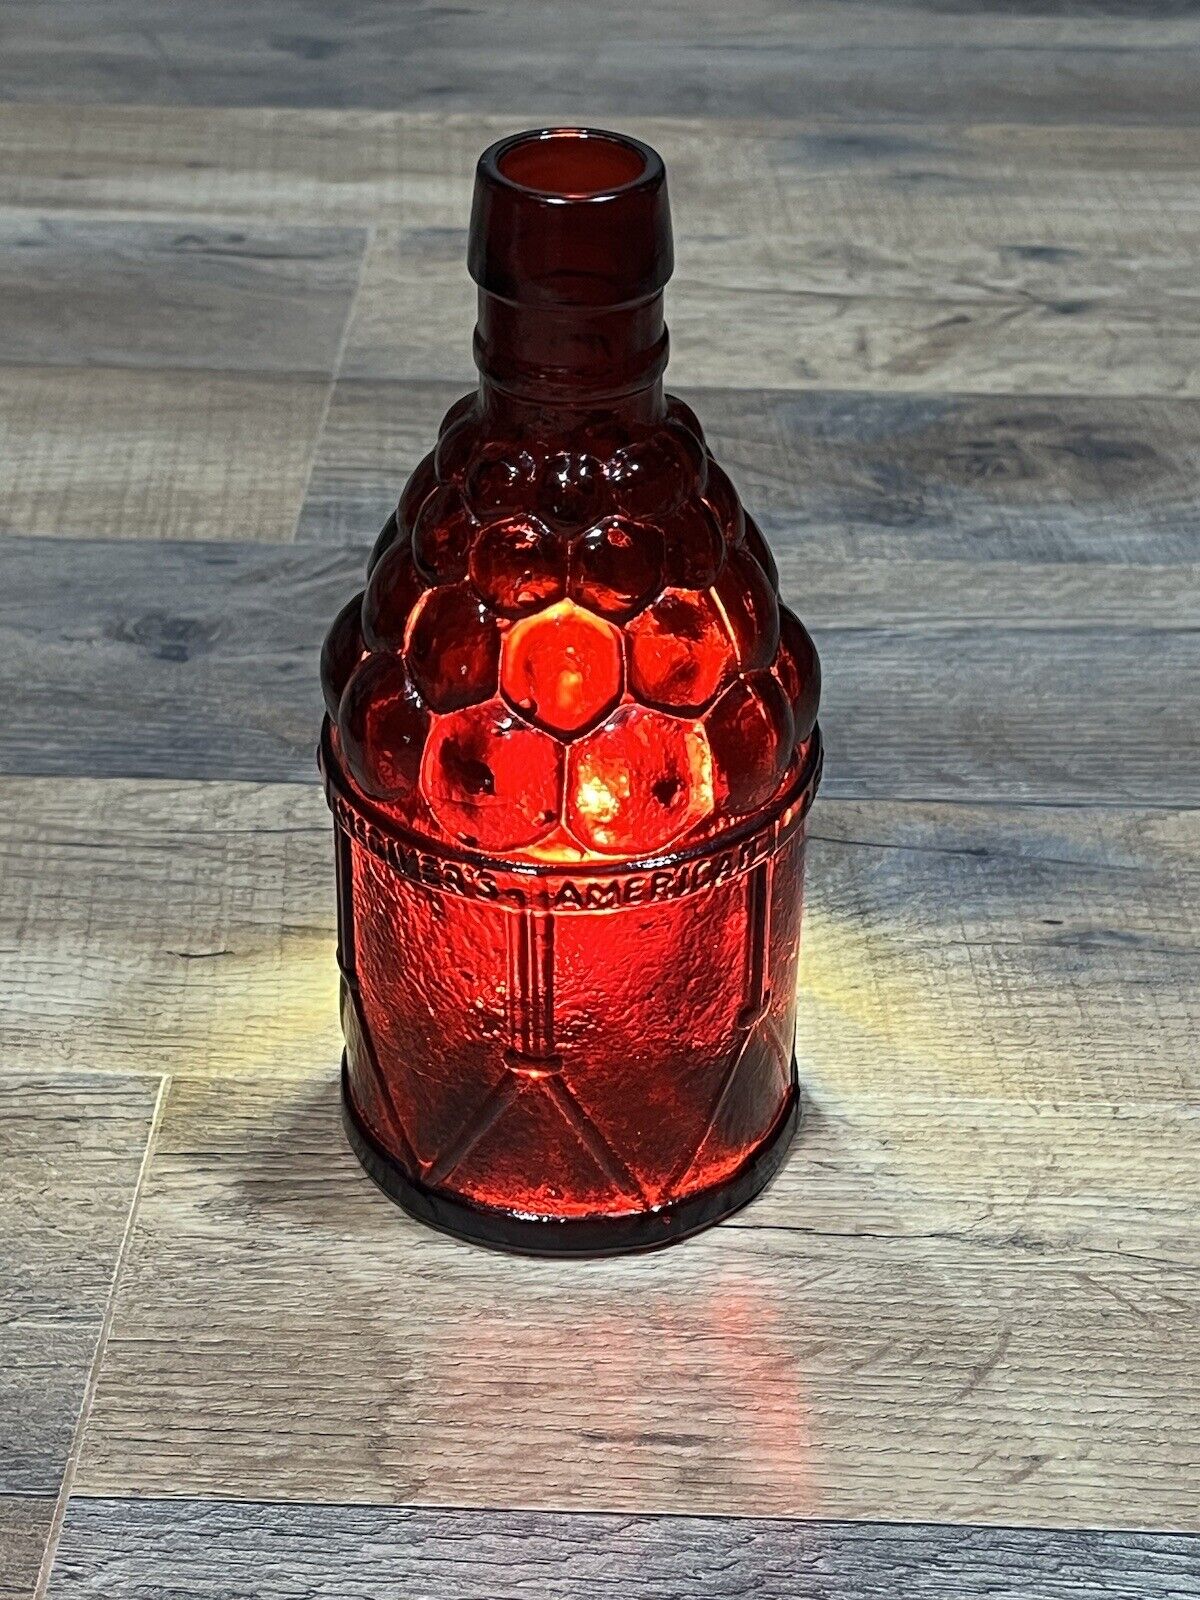 McGivers VTG American Army Bitters Bottle By Wheaton NJ Red Glass